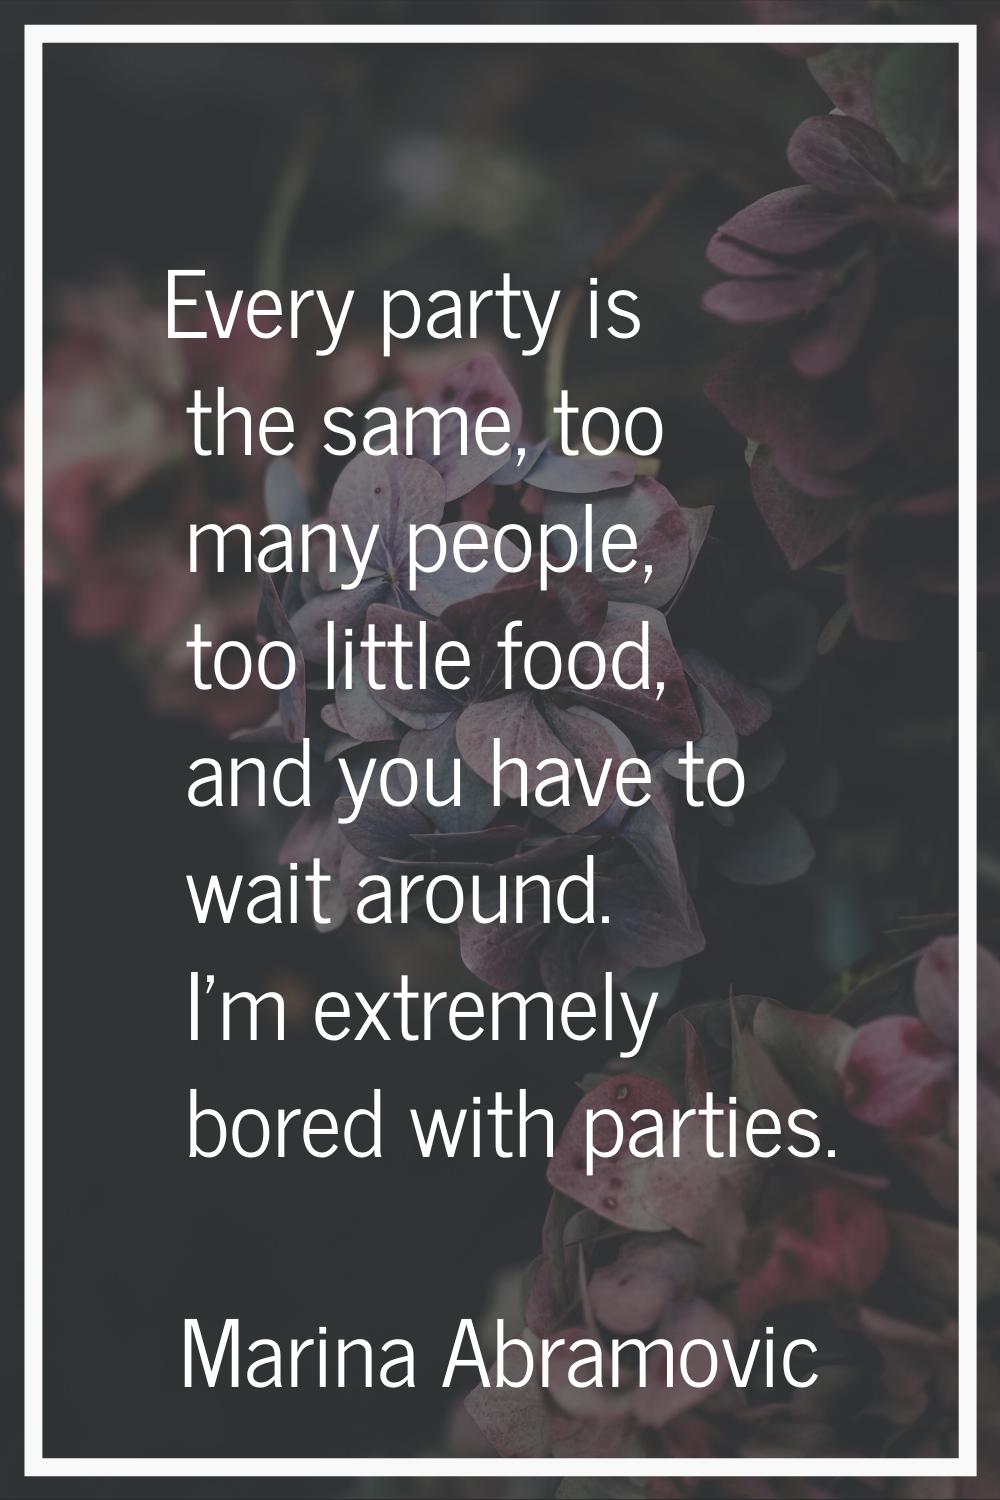 Every party is the same, too many people, too little food, and you have to wait around. I'm extreme